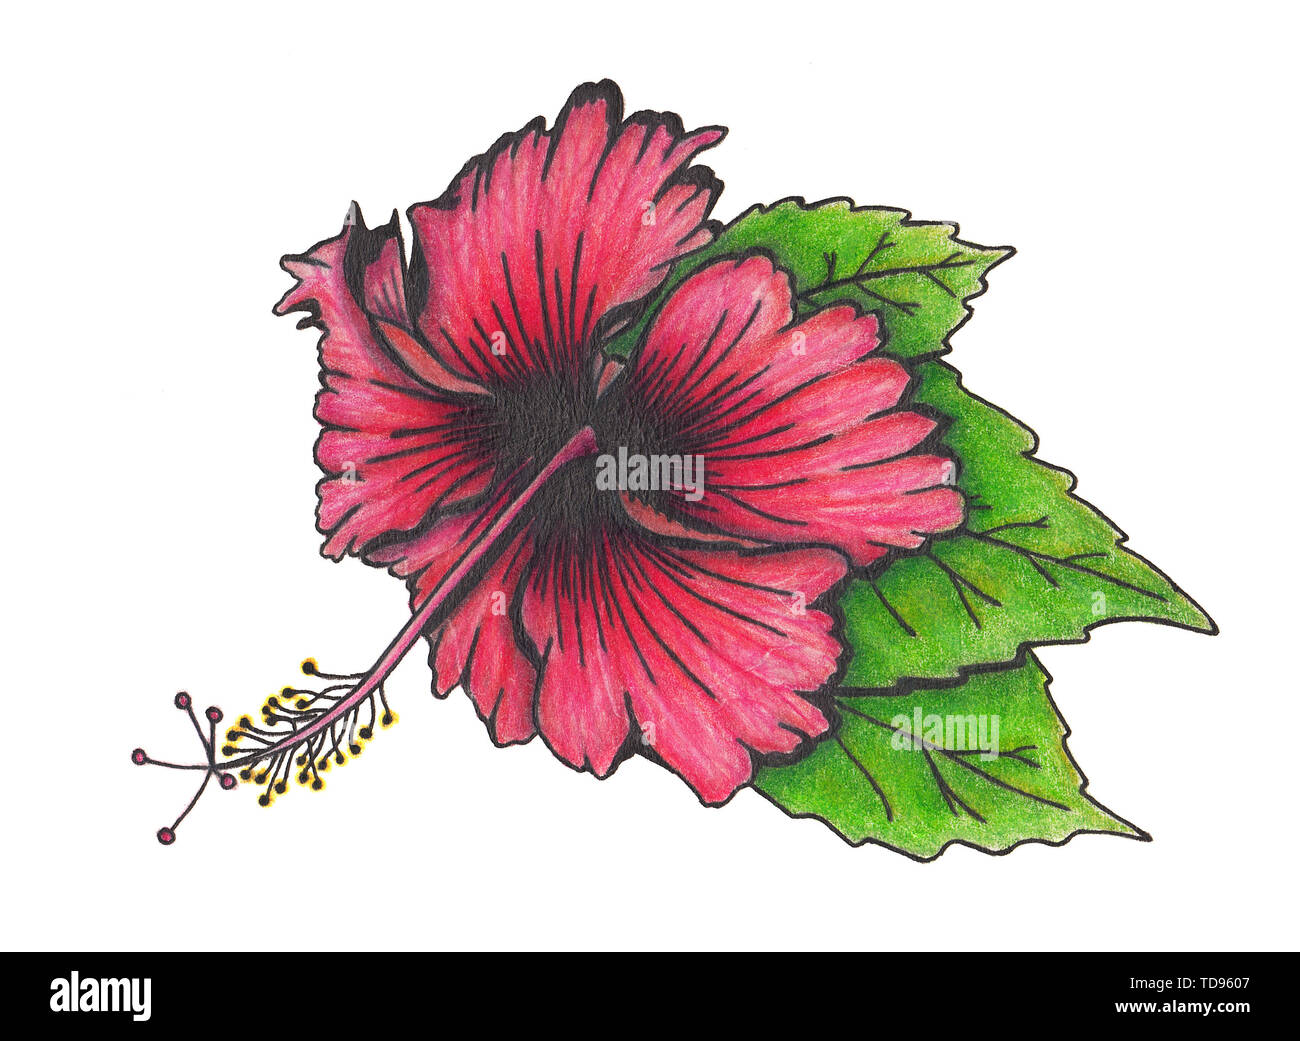 Hibiscus flower with leaves Stock Photo